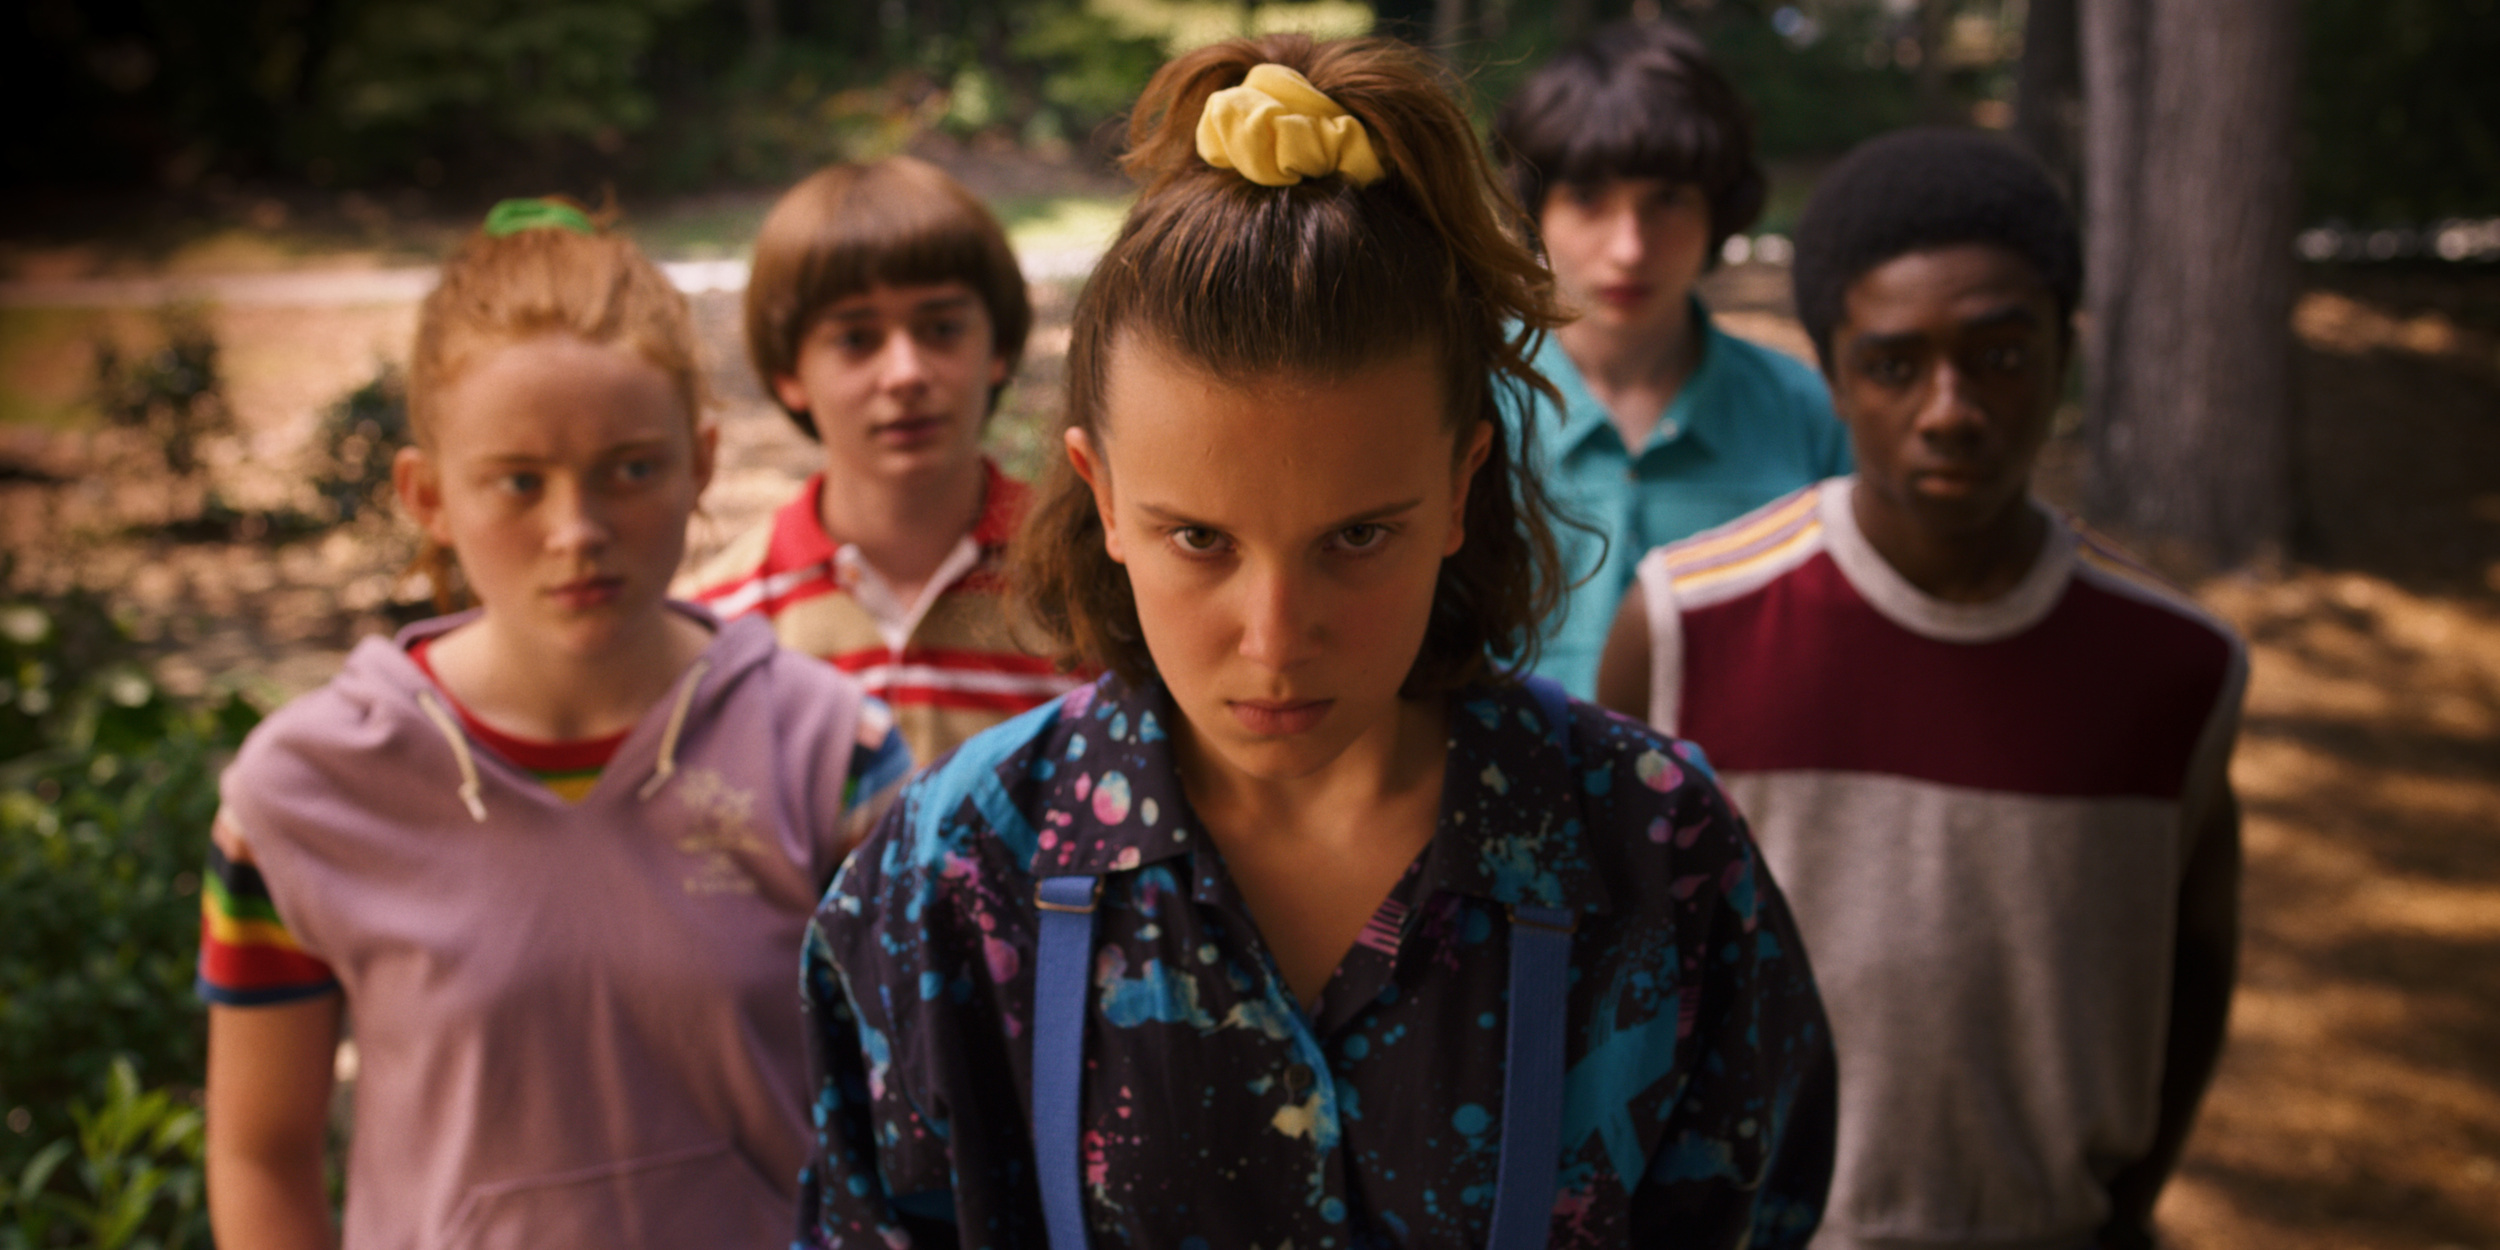 <p>There’s no question that <span><em>Stranger Things</em> </span>is one of the most popular series on Netflix. It’s easy to see why this would be the case since it features a very charming cast, a compelling story, and an appealing 1980s-inflected nostalgia. With each season, the series has only gotten better, as the group of young people at its core attempt to prevent the creatures from the dark realm known as the Upside Down, including the nefarious Vecna, from bringing about the total destruction and ruin of their world. Like the best dark fantasy, it manages to strike a balance between childlike wonder and bone-chilling terror.</p><p>You may also like: <a href='https://www.yardbarker.com/entertainment/articles/20_of_musics_most_unique_voices/s1__39013407'>20 of music's most unique voices</a></p>